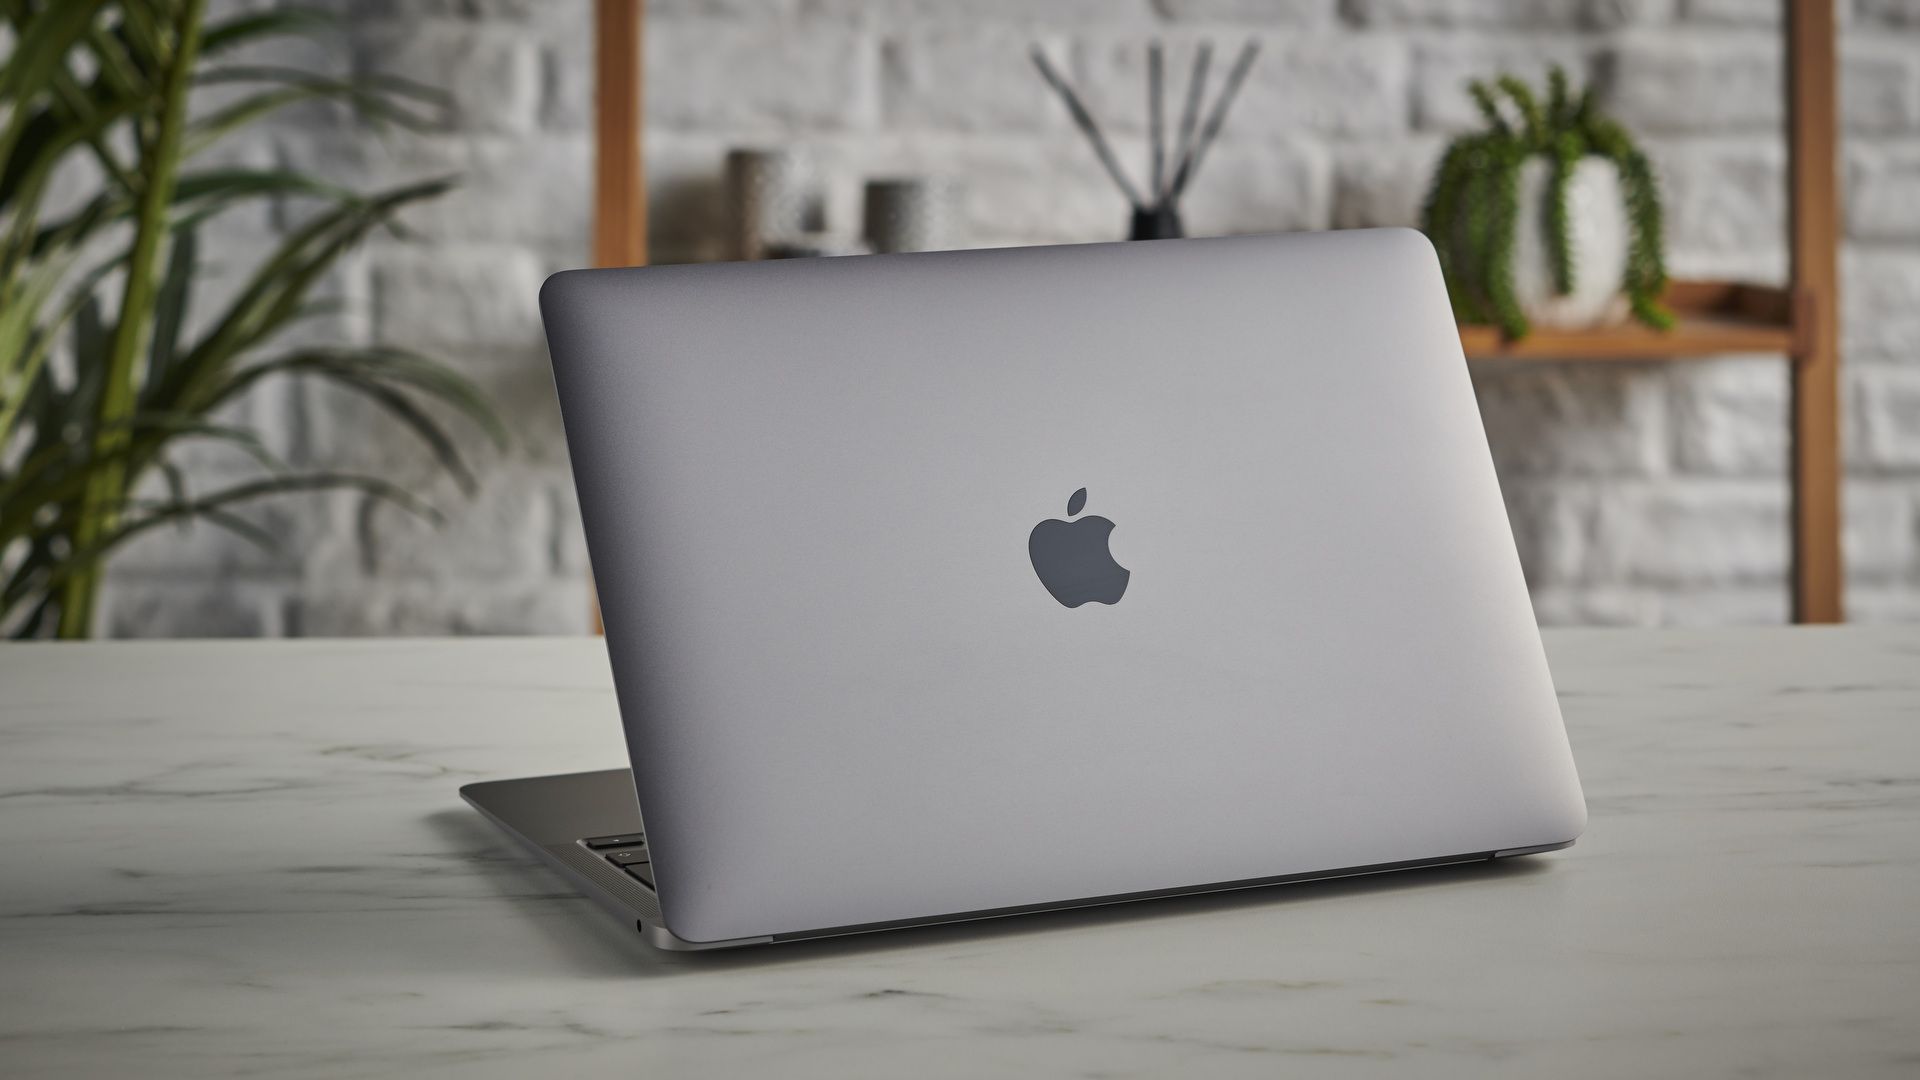 MacBook Air 2022 was missing in action at Apple’s Event, but leaker